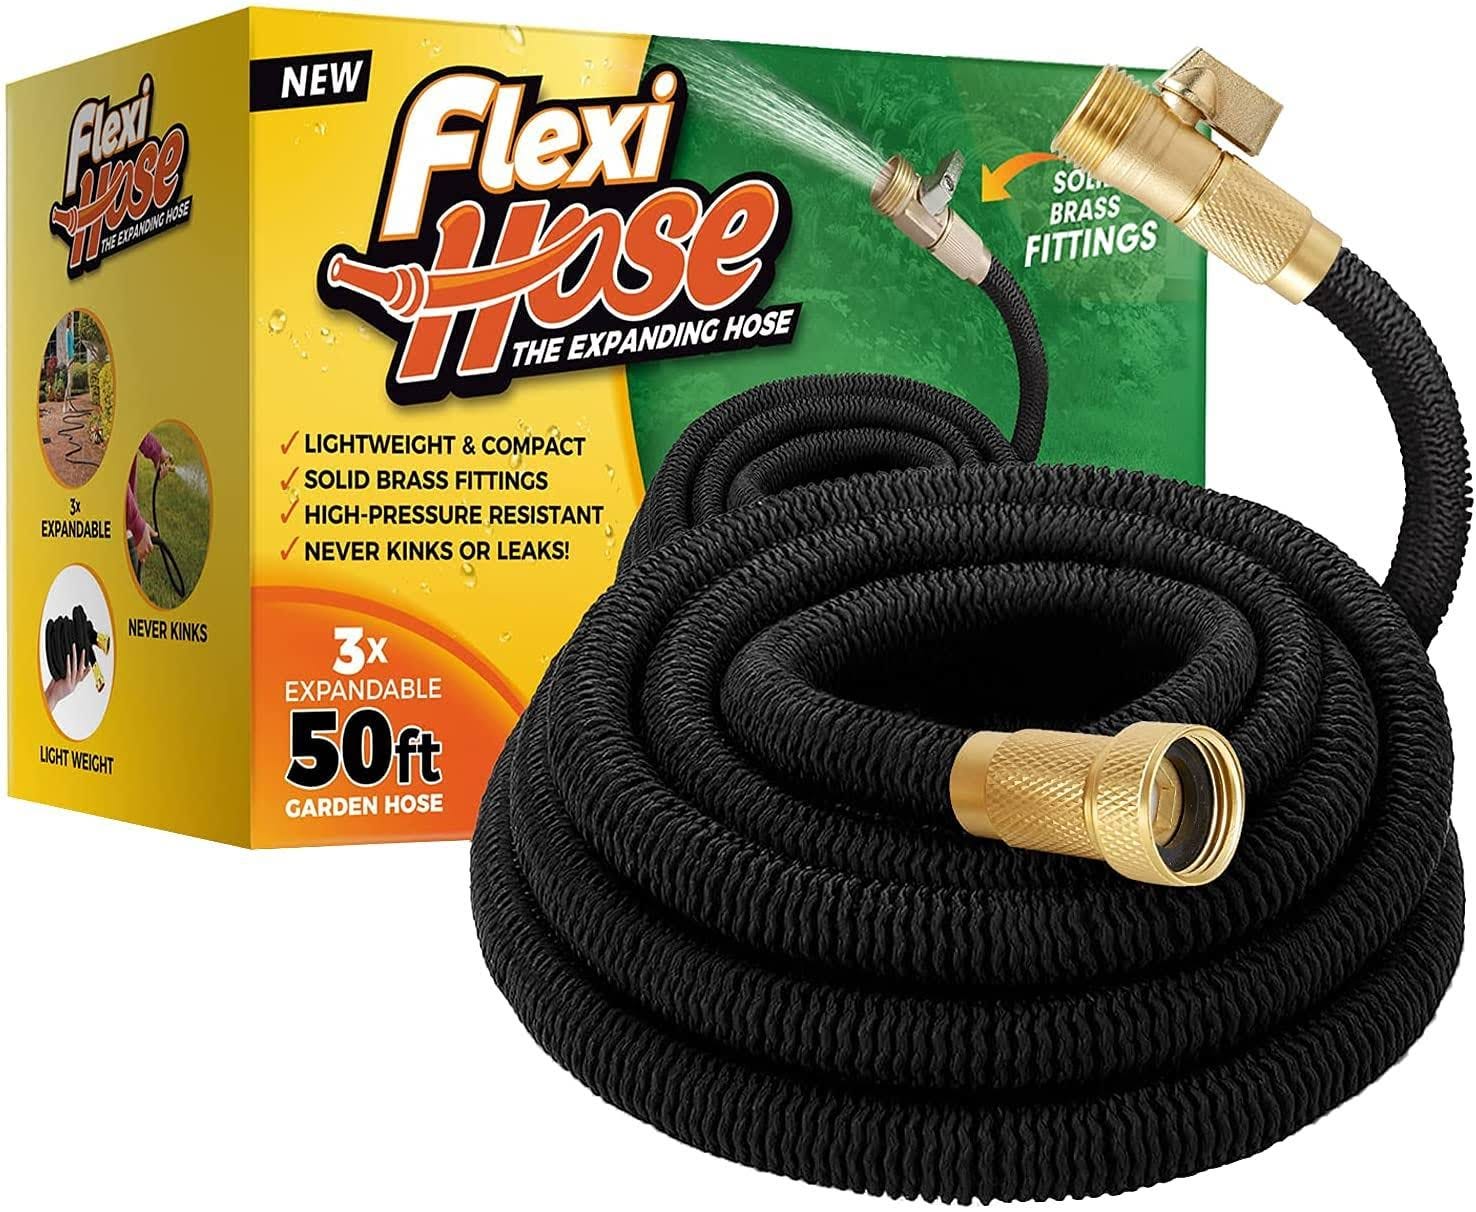 Flexi Hose - 50 ft Expandable Garden Hose with Solid Brass Fittings | Image